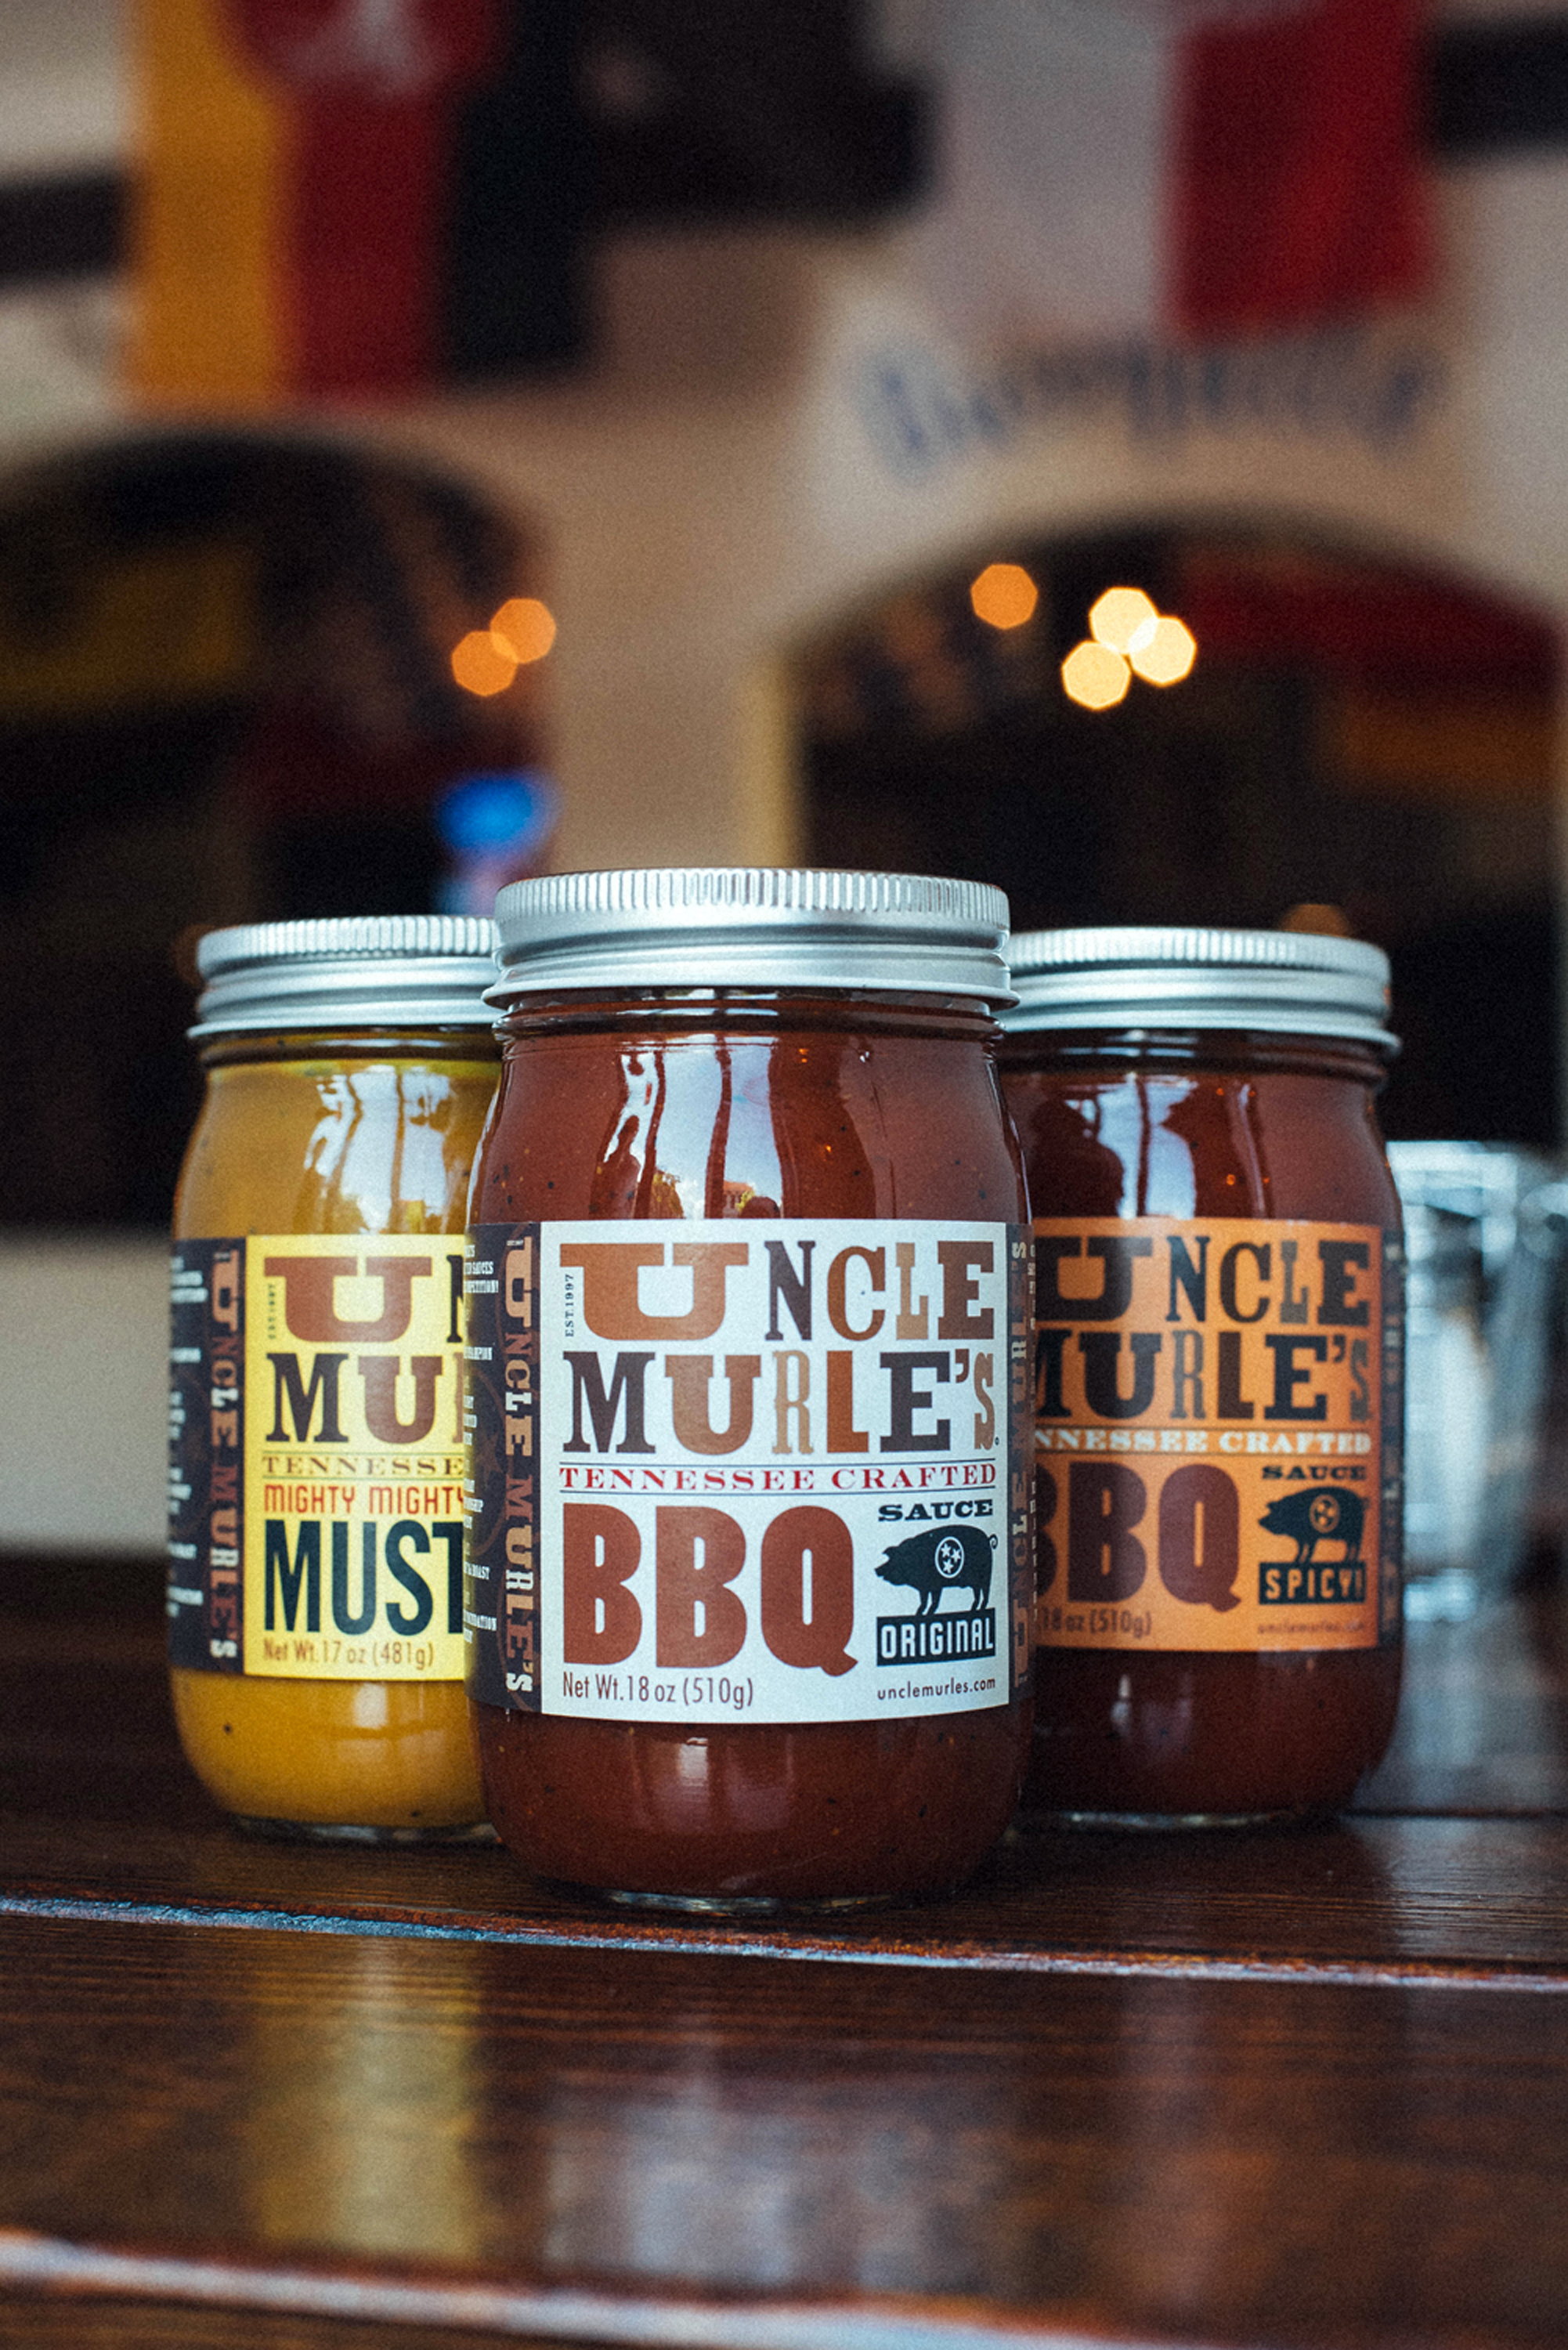  Uncle Murle’s BBQ Sauces packaging  Branding creative and design by Chuck Mitchell  Photograph by Reid Mitchell 